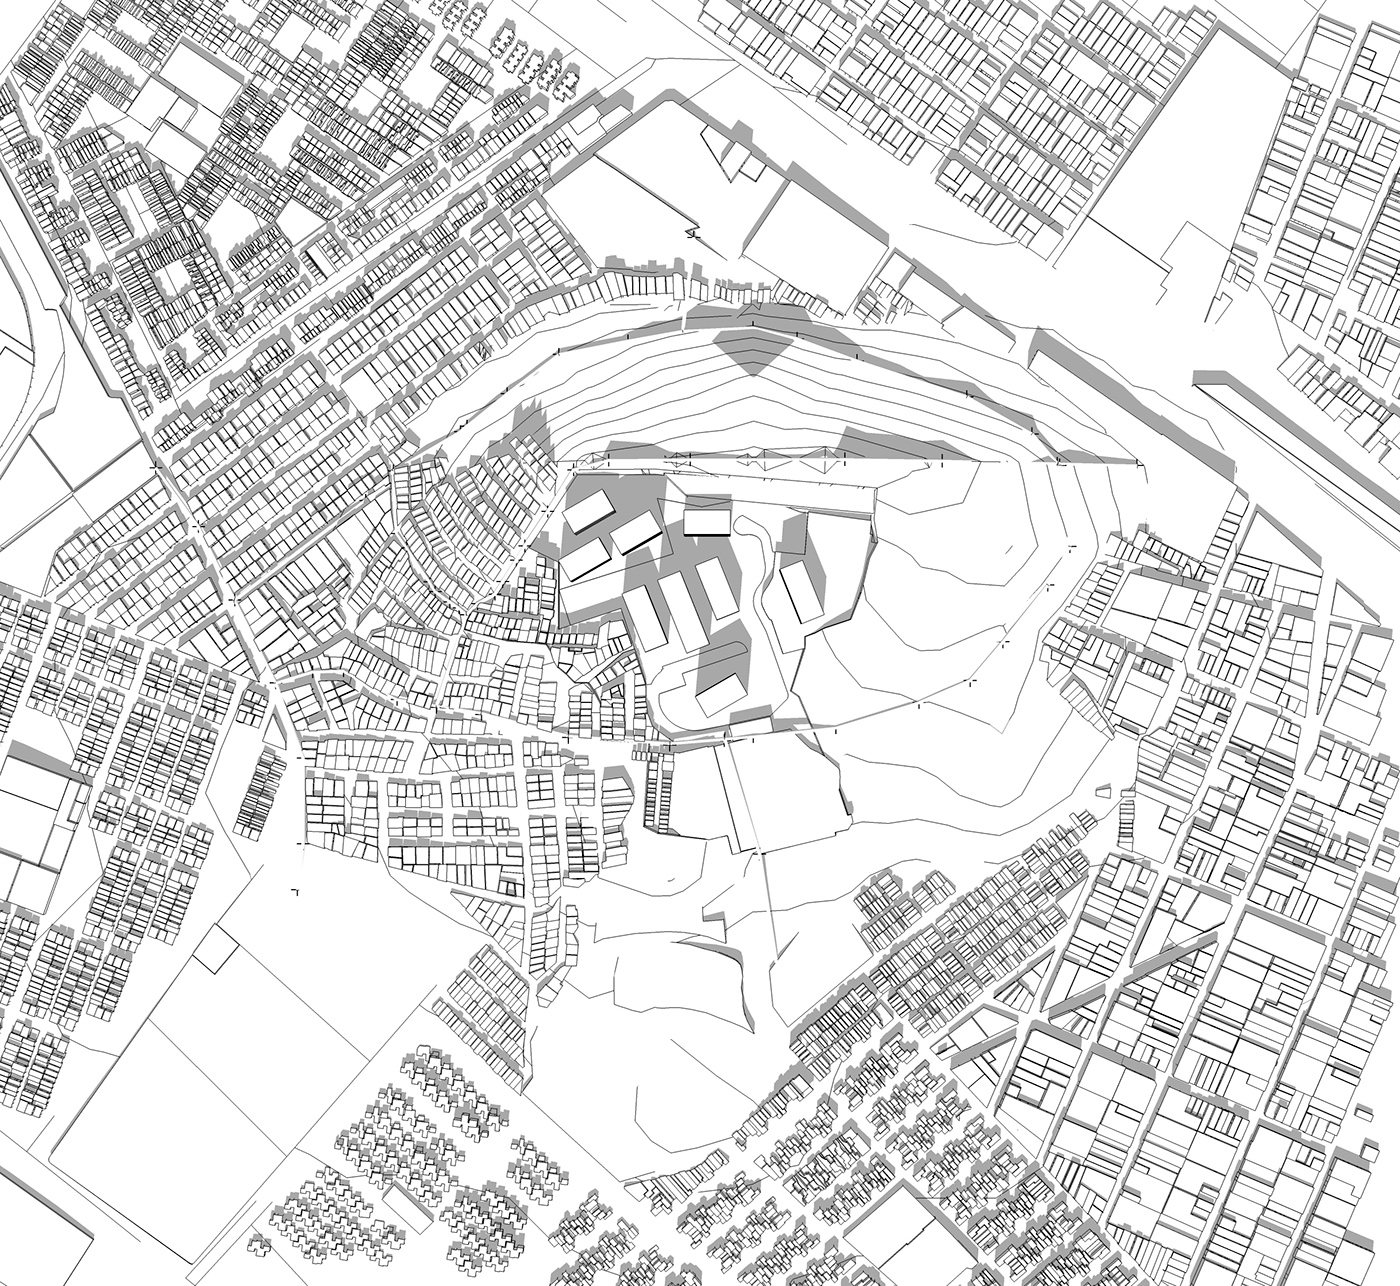 iztapalapa Urban Landscape architecture Mapping spaces ArcGIS generative abstract